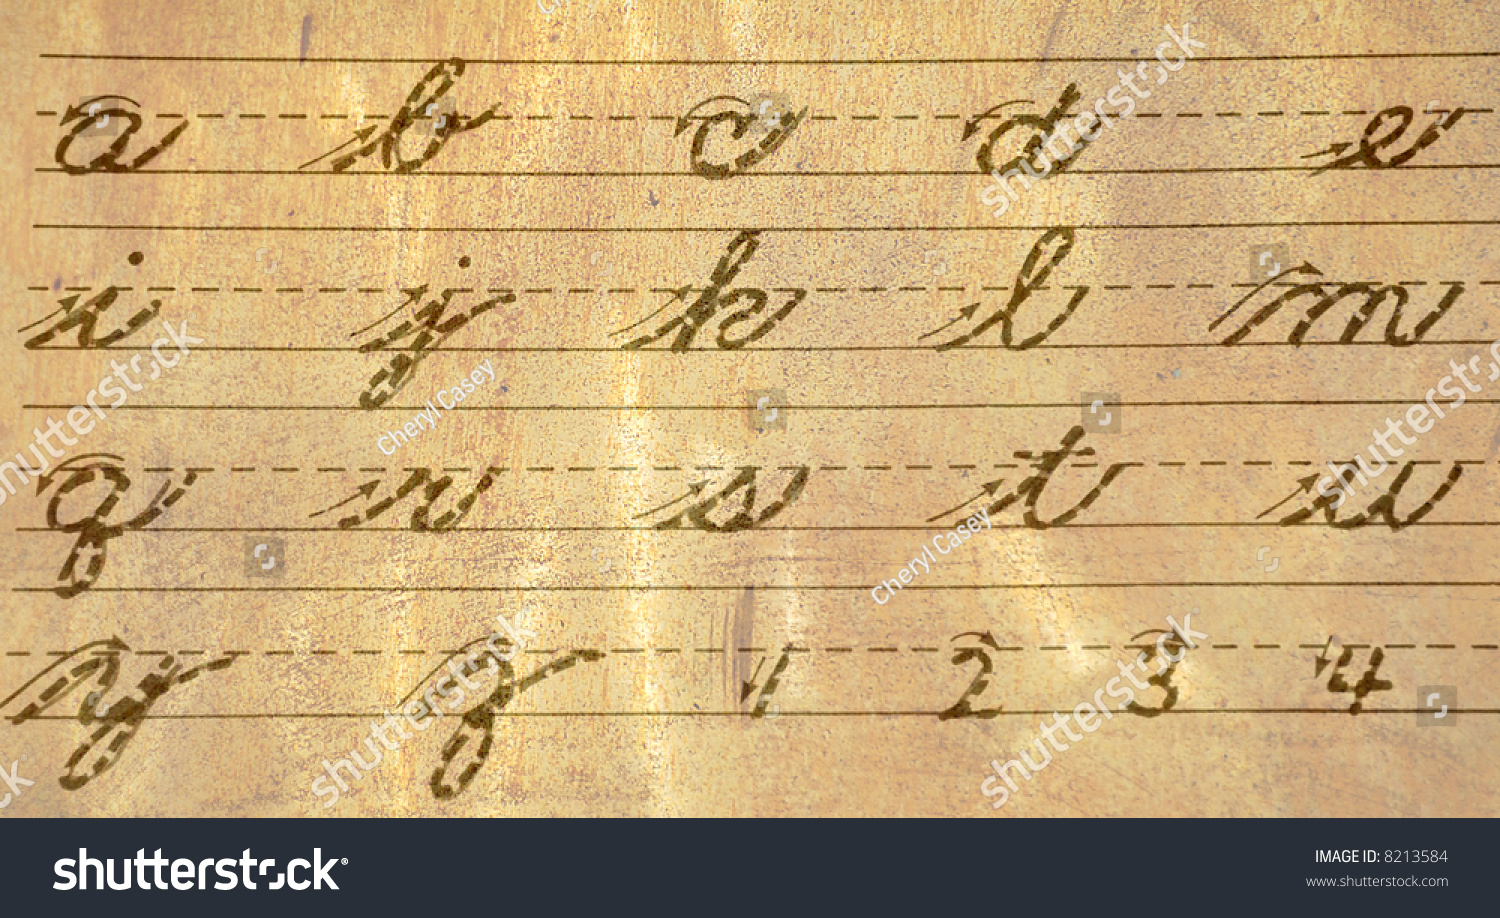 How To Write In Old Fashioned Handwriting 28